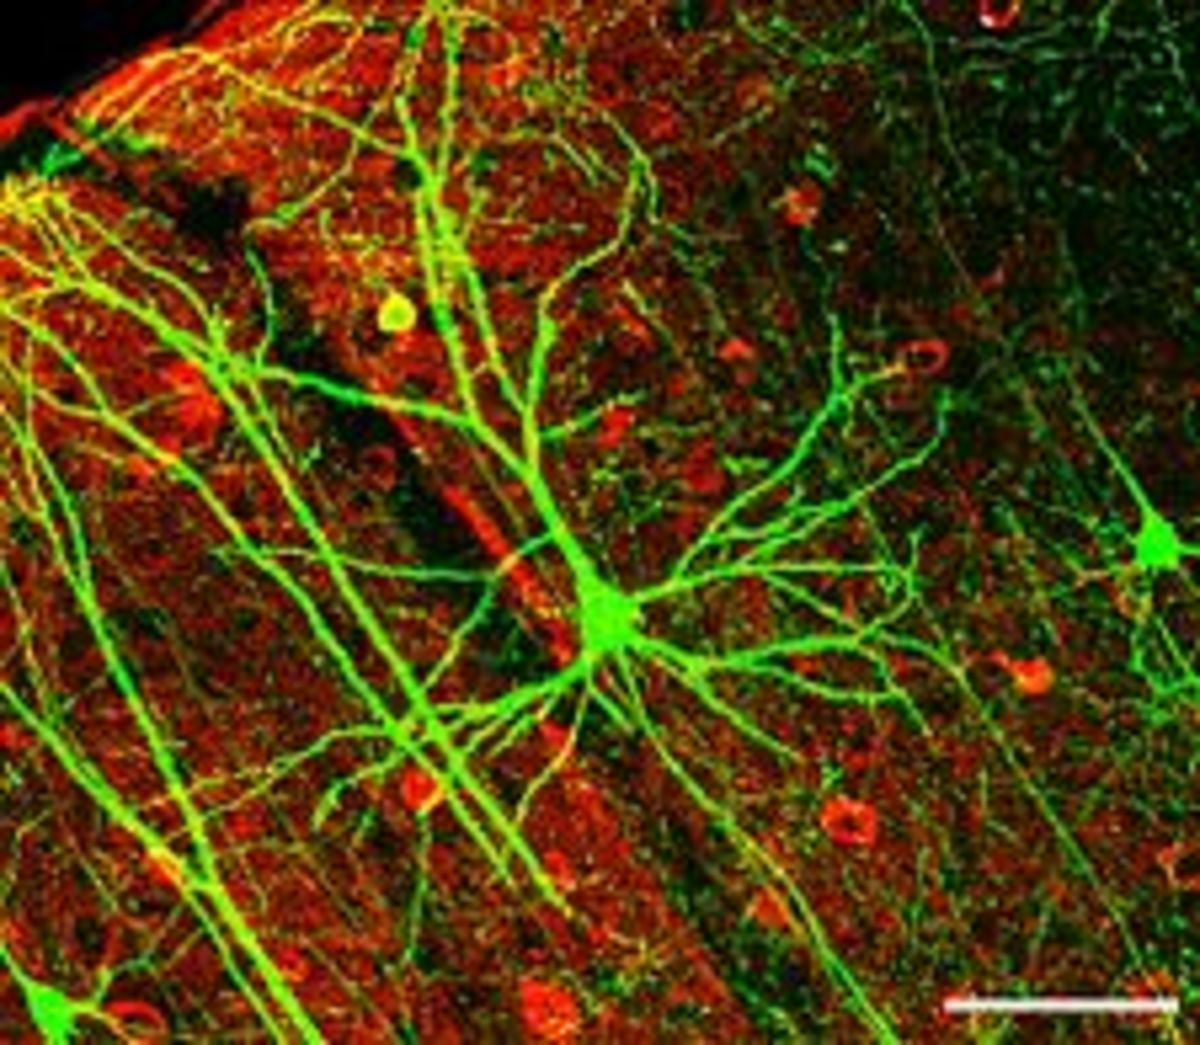 Dendrites and neurons in the hippocampus, which play a major role in learning and memory.